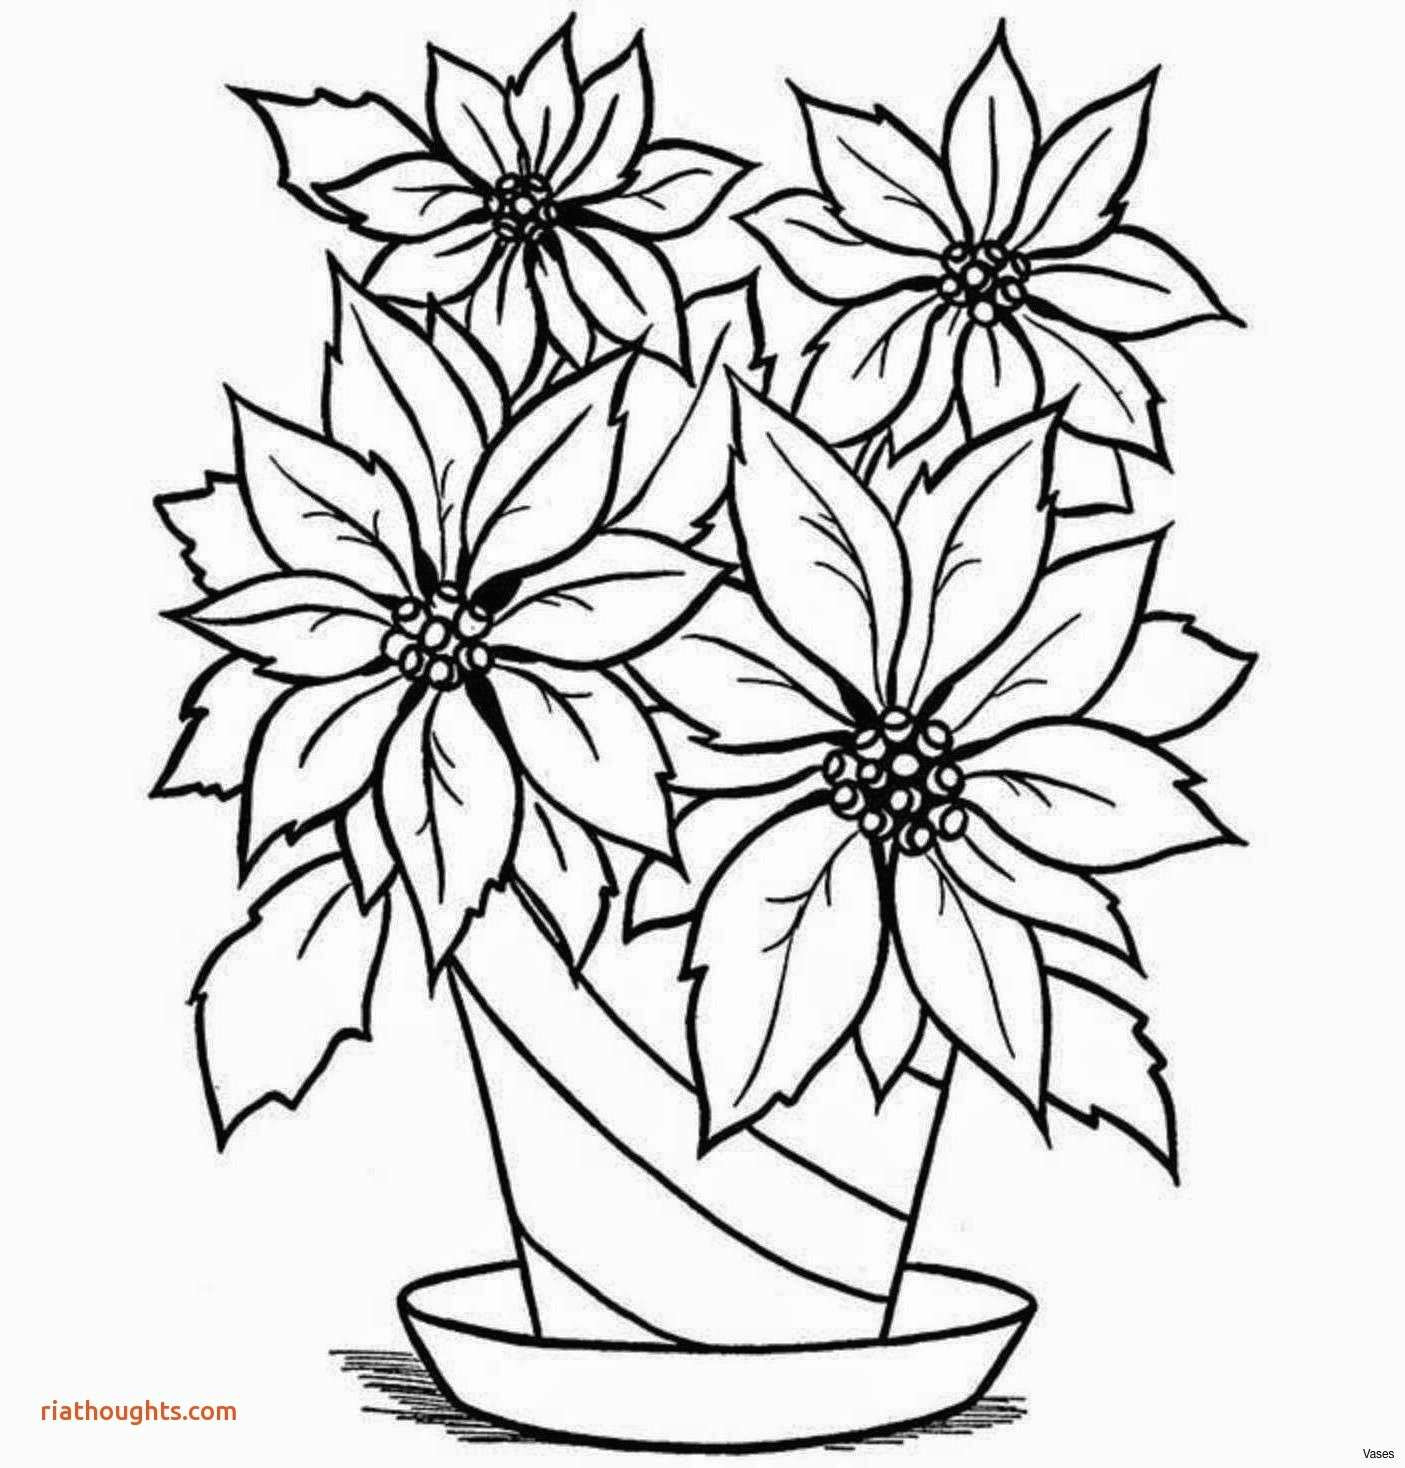 Drawing Flowers with Pencil Step by Step 25 Fancy Draw A Flower Helpsite Us